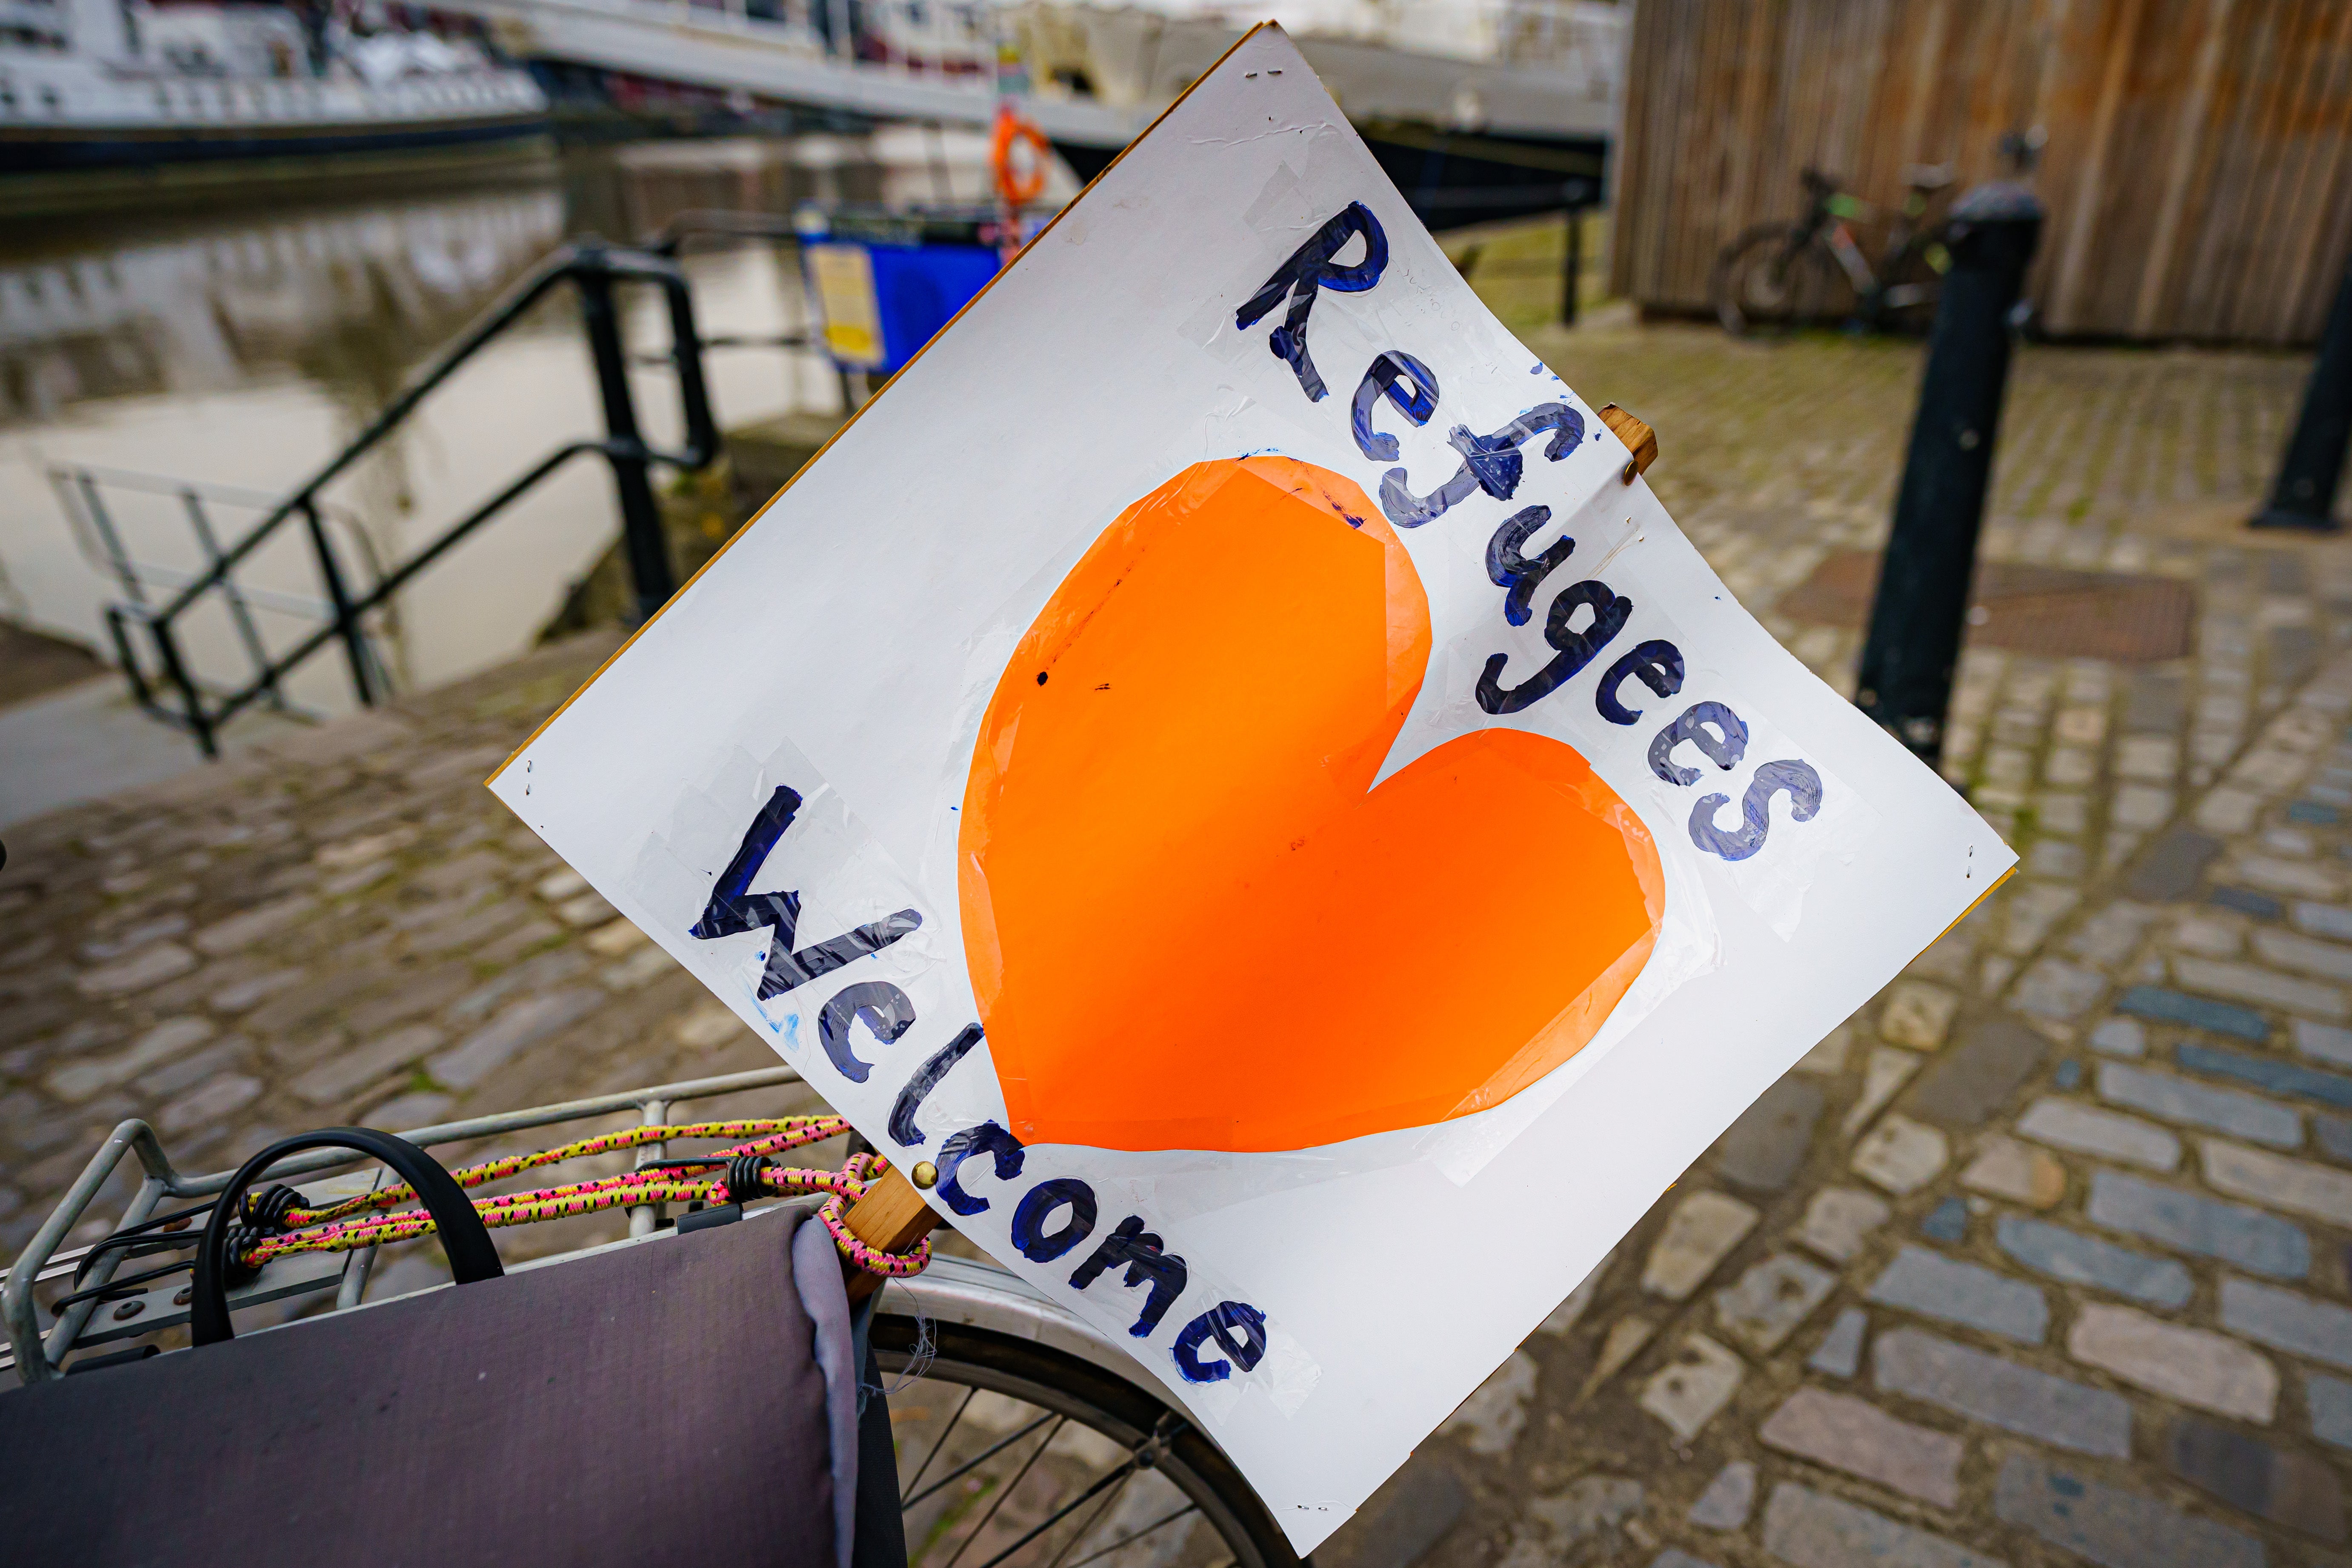 A ‘refugees welcome’ banner is attached to a bicycle in Bristol (Ben Birchall/PA)